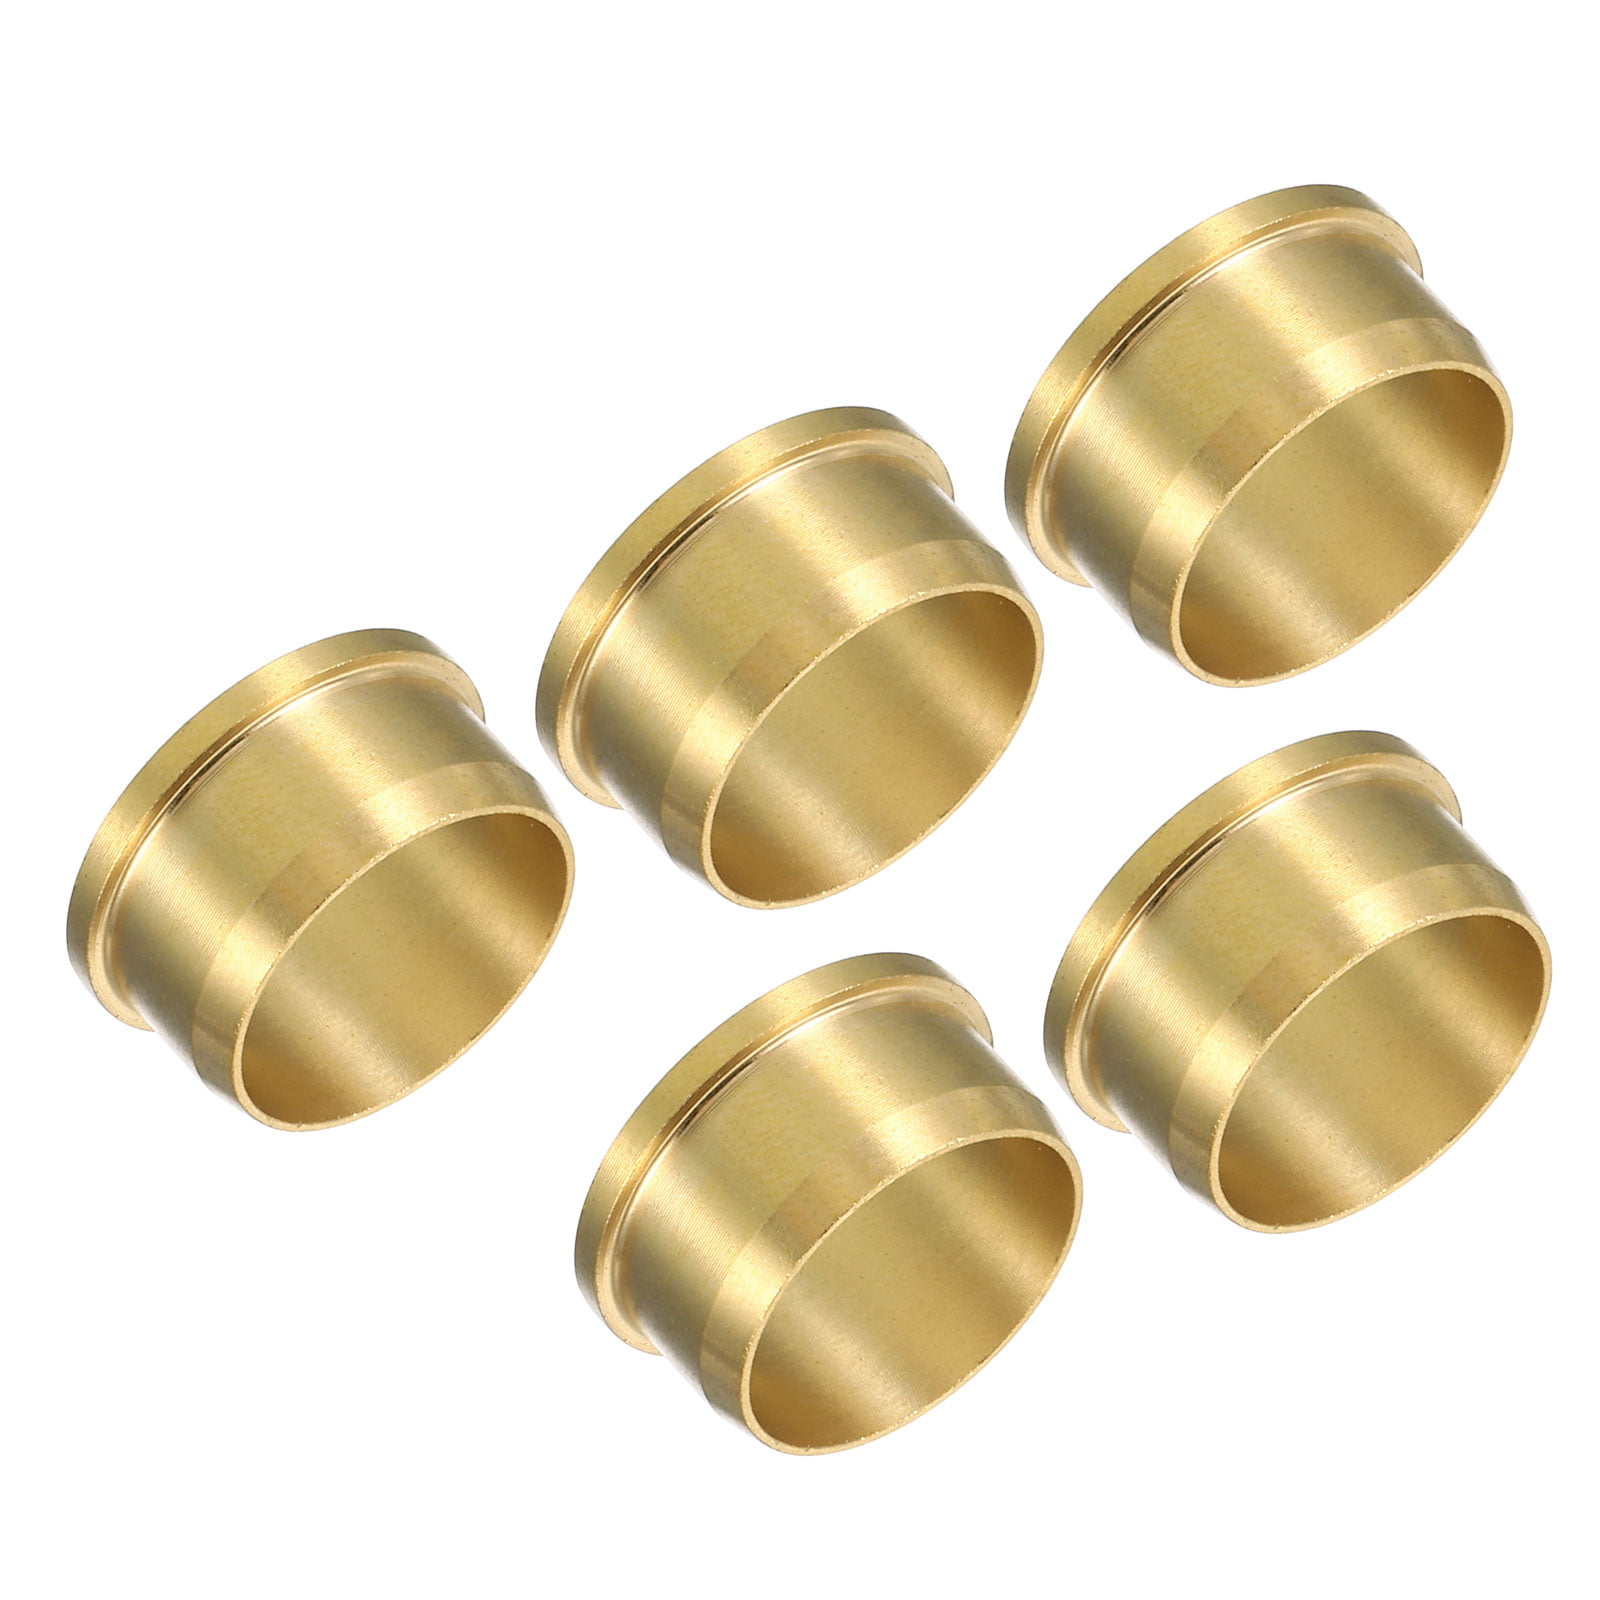  Hitefu Brass Sleeve Brass Fittings Brass Ferrule Kit, 50Pcs  3/8(10mm) Tube Od Metal Sleeve Compression Tube Fitting for Use with Fuel  And Gas Systems : Everything Else